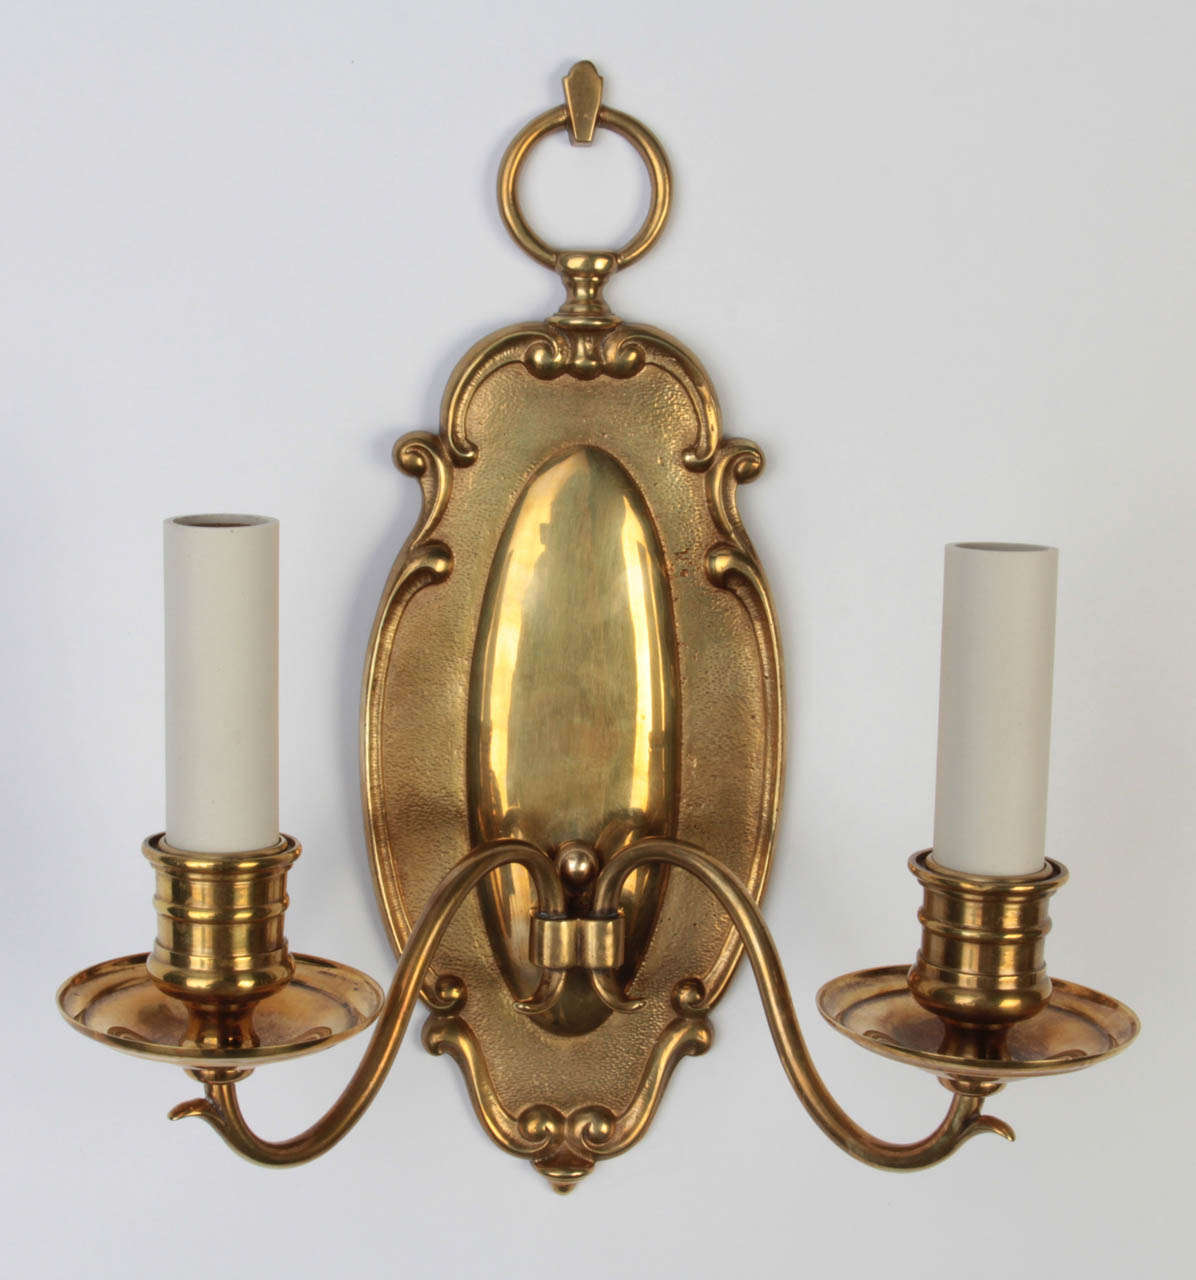 A pair of double light cast brass sconces in a mellow hand polished patina.

Dimensions:
Overall: 12-1/2